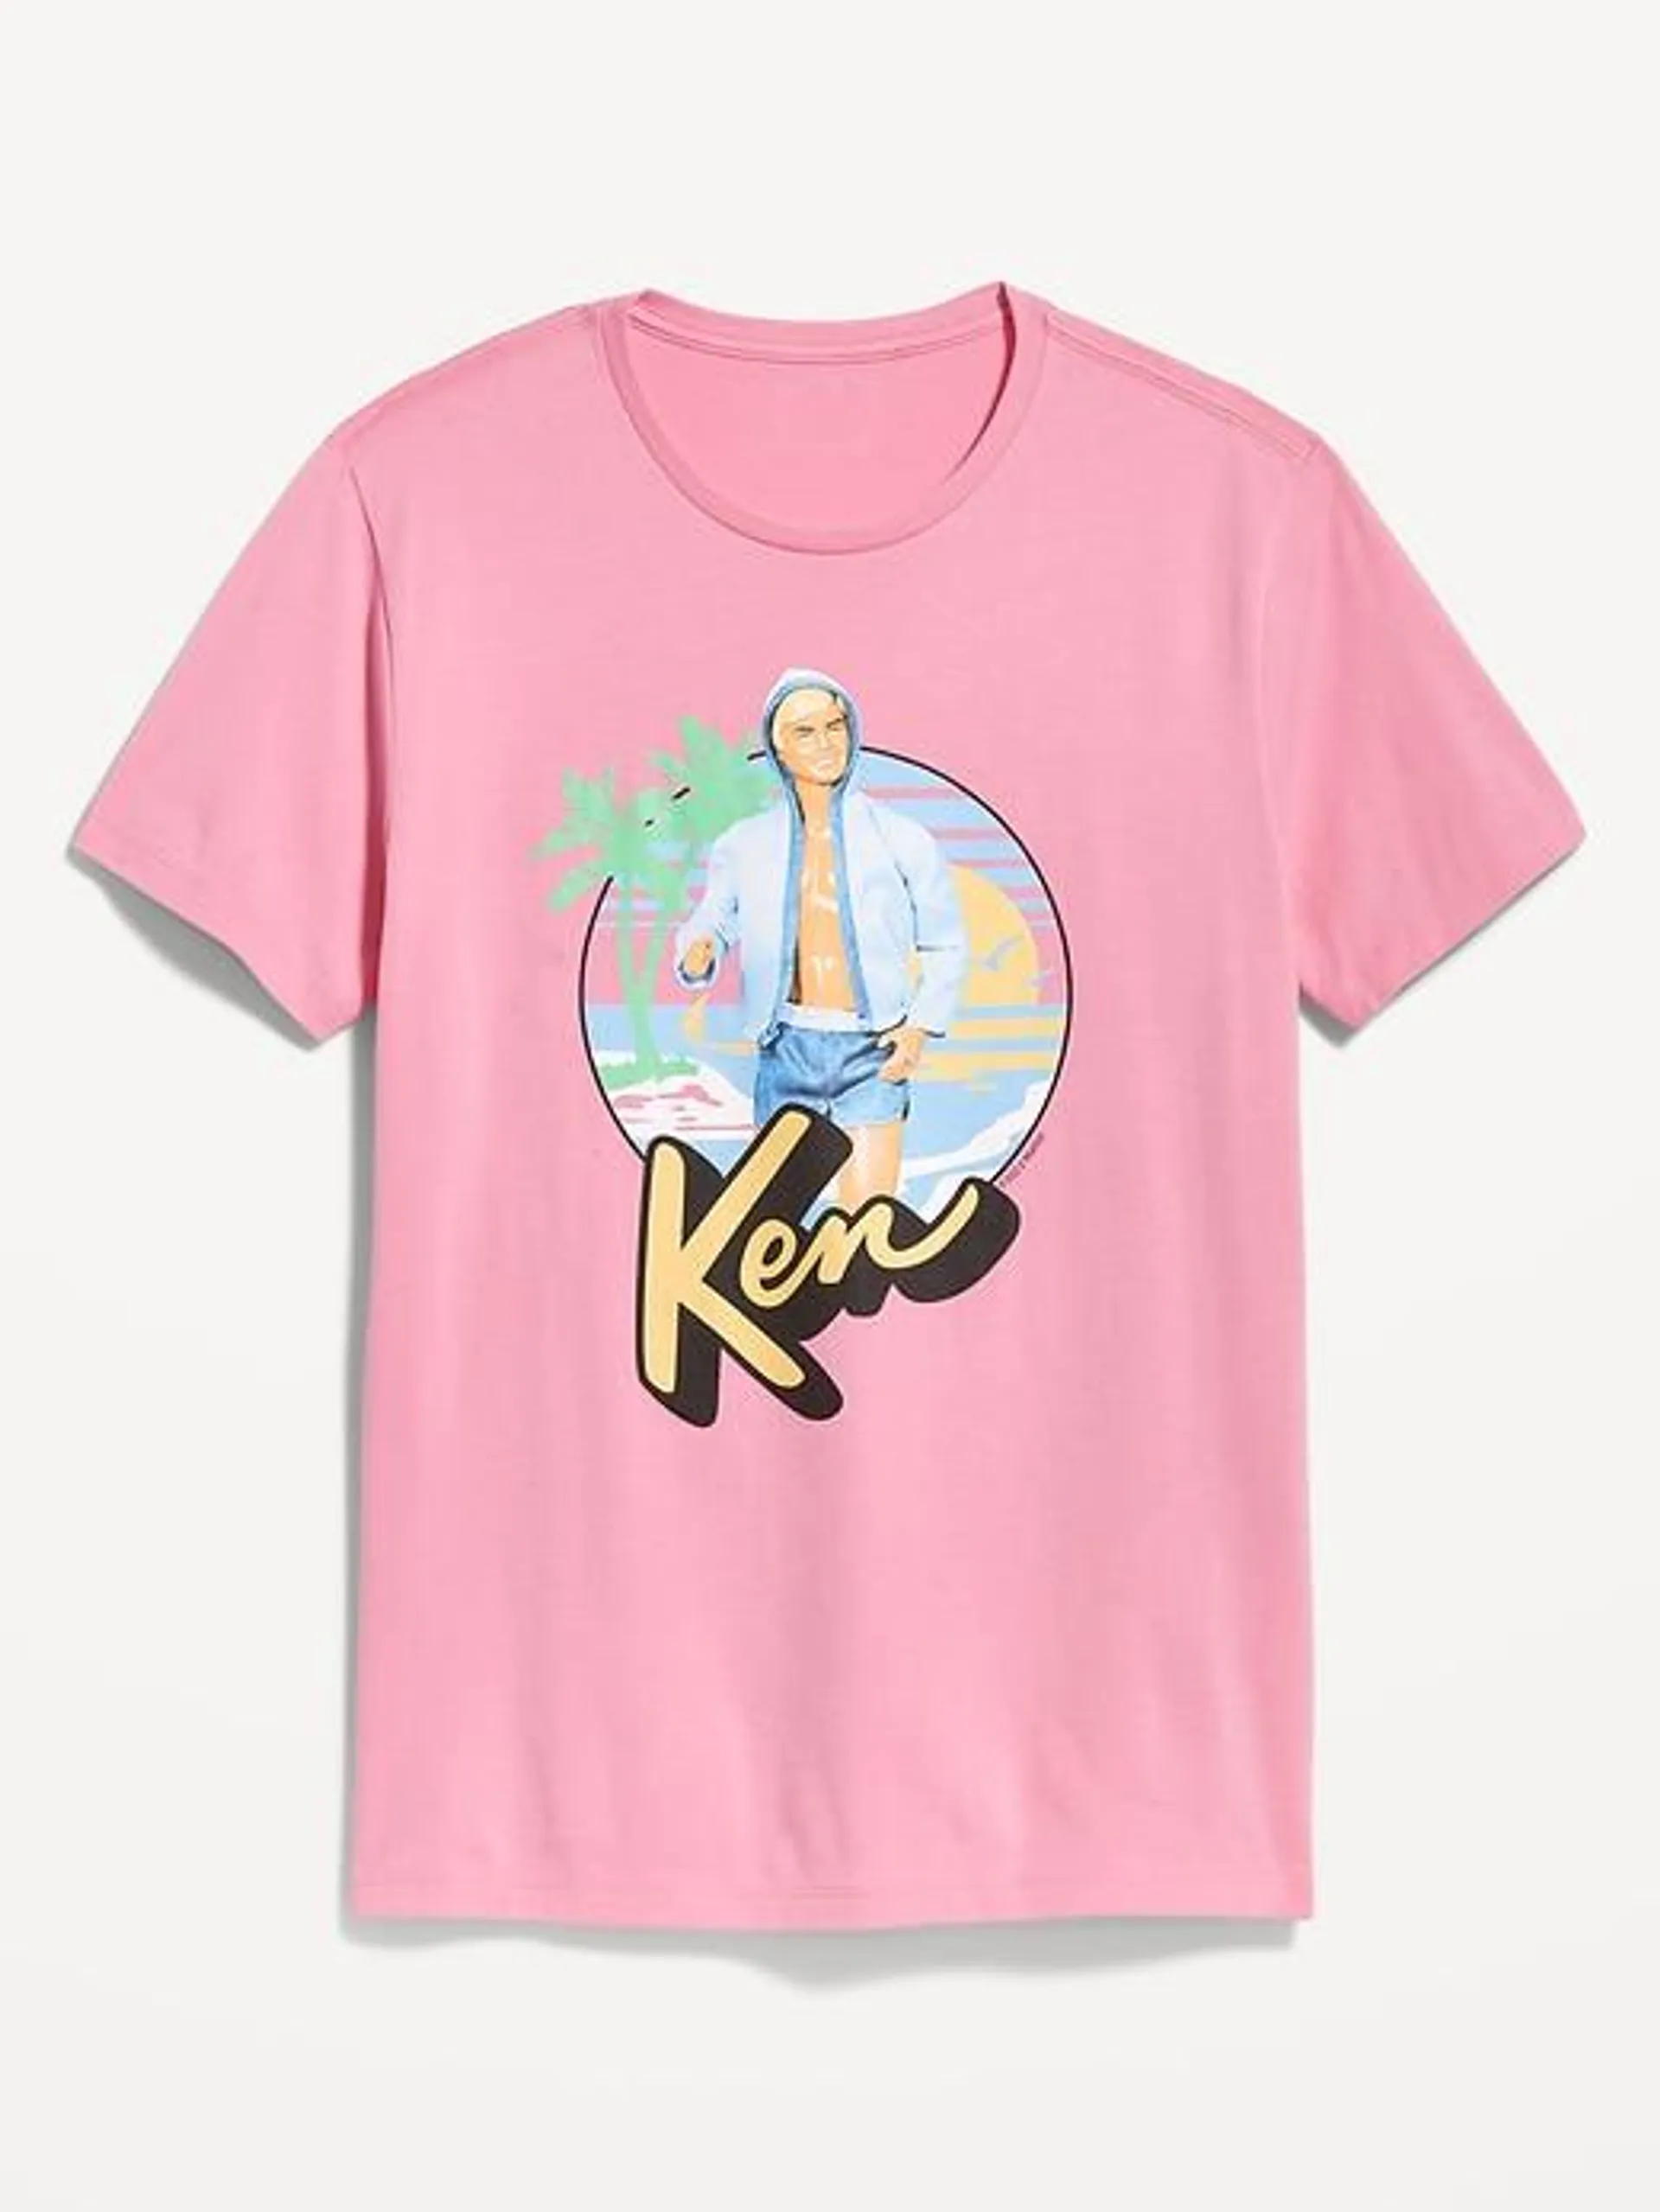 Ken® Doll Gender-Neutral Graphic T-Shirt for Adults